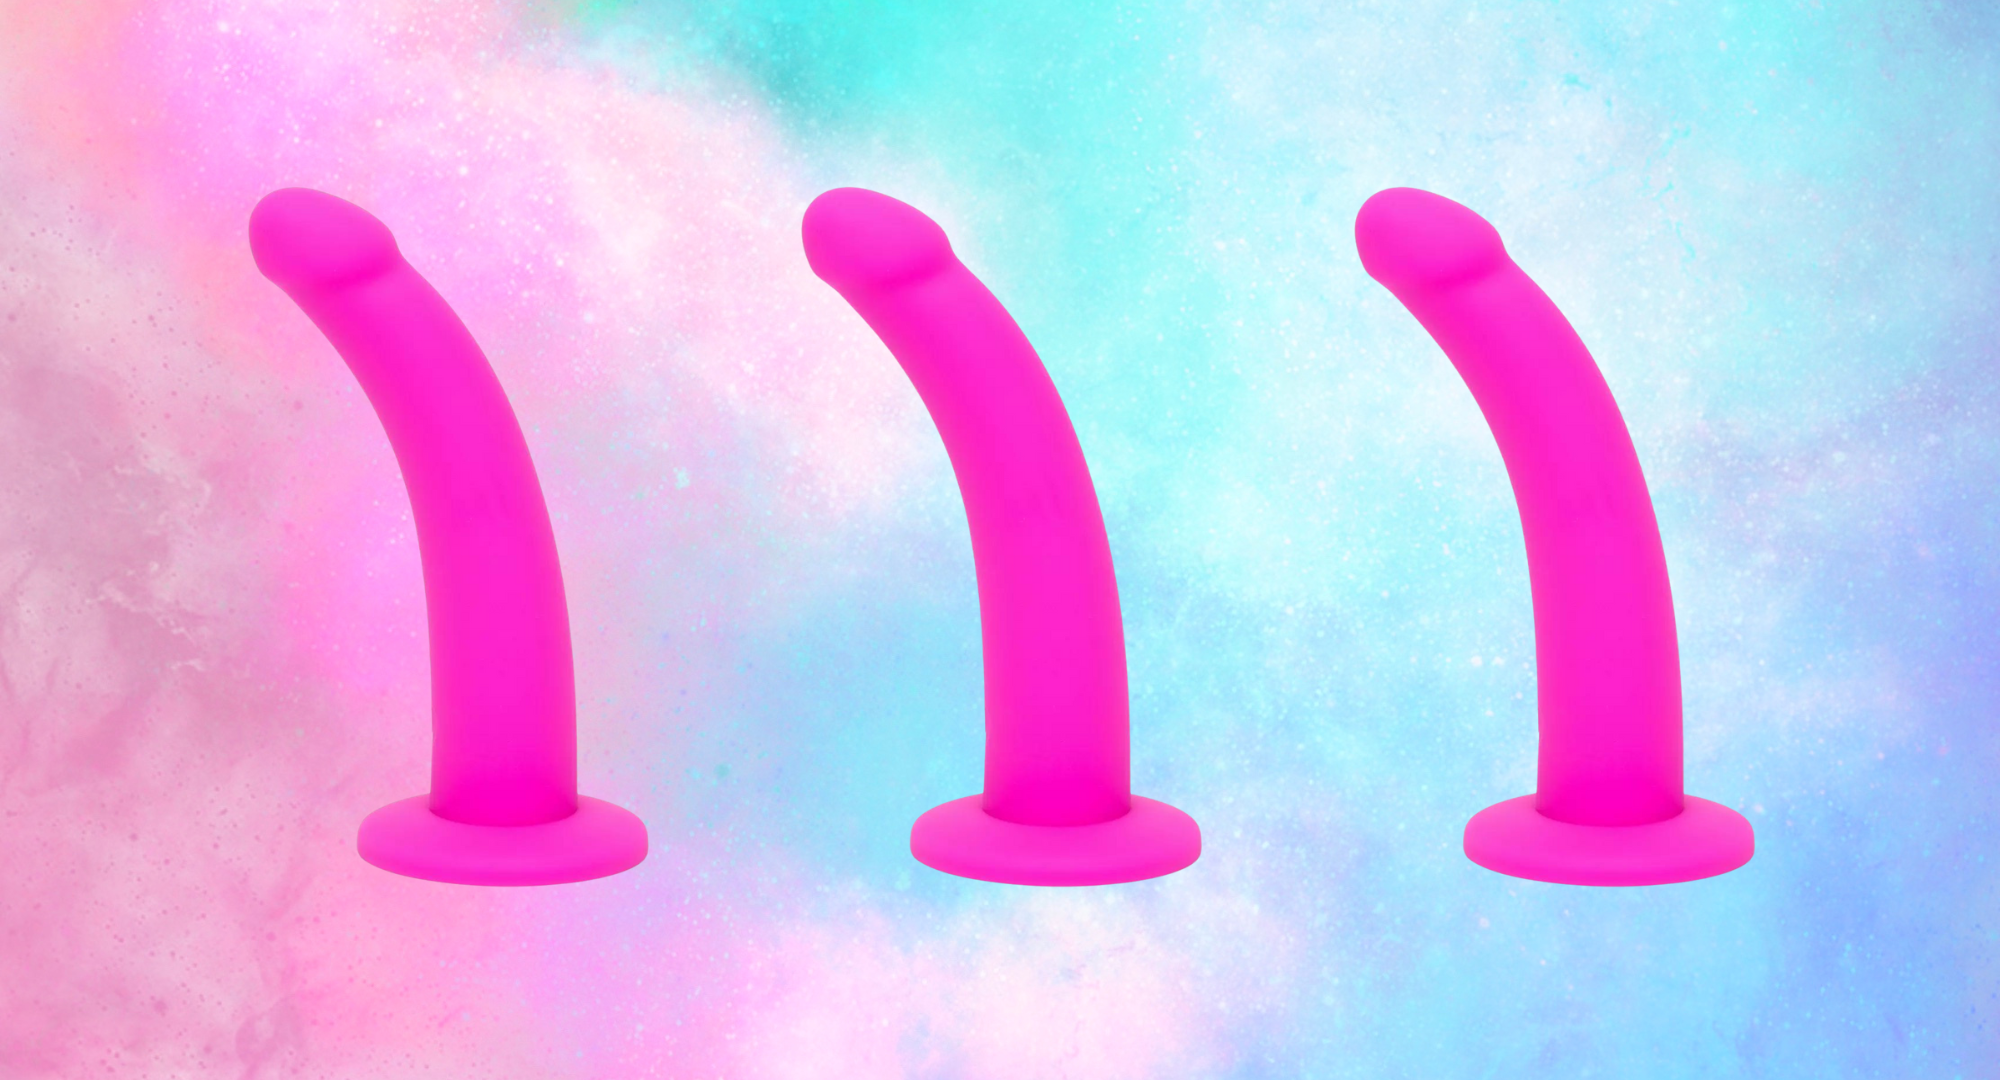 suction cup dildos against a pink and blue background